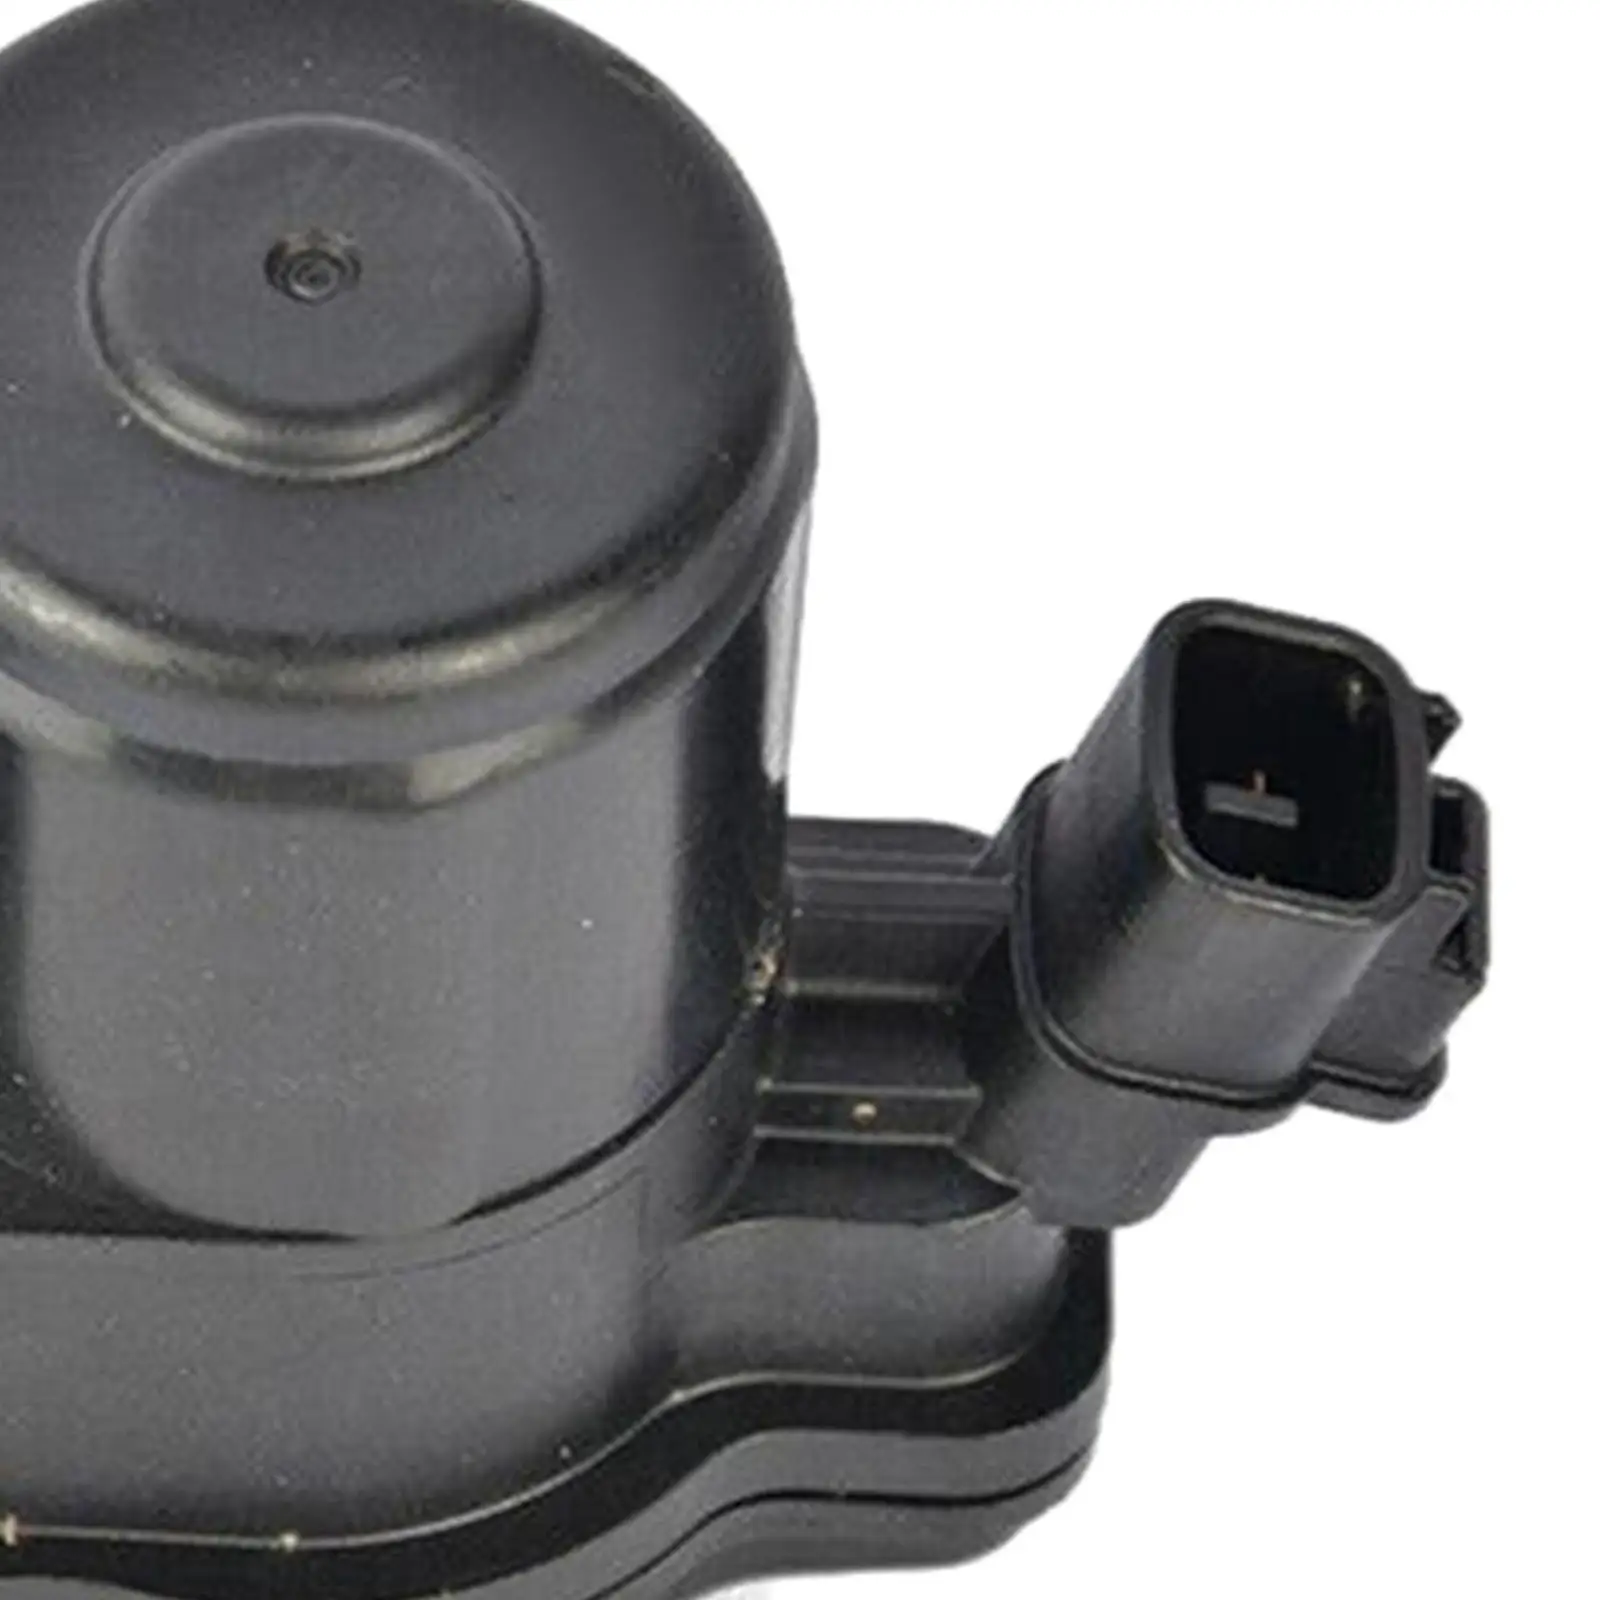 Parking Brake Actuator Assembly Replaces for Toyota for highlander Avalon